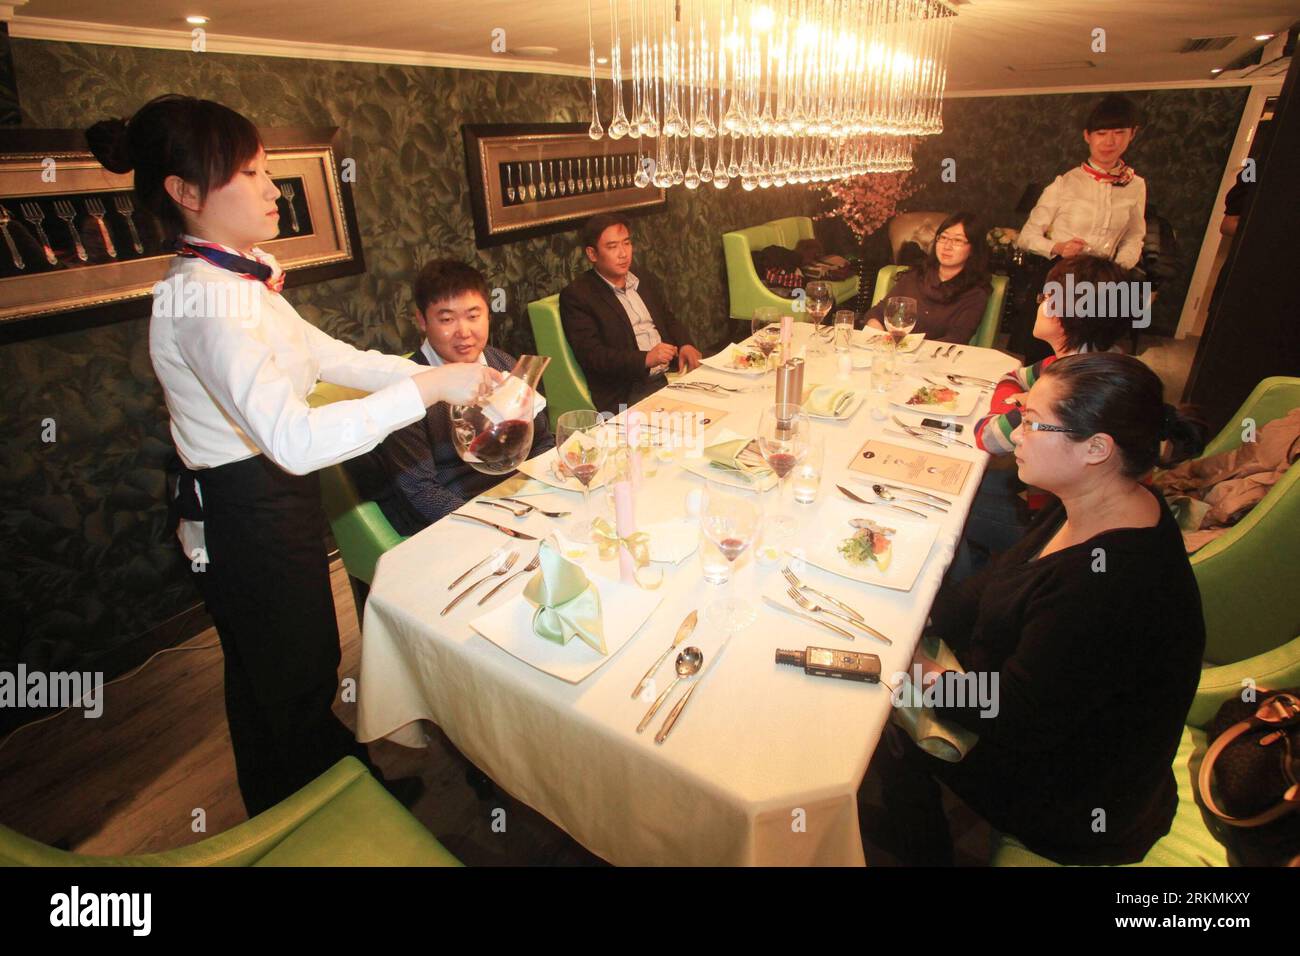 Bildnummer: 56783497  Datum: 22.12.2011  Copyright: imago/Xinhua (111223) -- TIANJIN, Dec. 23, 2011 (Xinhua) -- Waitresses pour wine for customers in a Russian restaurant which was newly opened in the Kiev, a former Soviet Union aircraft carrier now transformed into a hotel, in the Binhai Aircraft Carrier Theme Park in Tianjin Municipality, north China, Dec. 22, 2011. (Xinhua/Wang Huan) (llp) CHINA-TIANJIN-AIRCRAFT CARRIER KIEV-RUSSIAN RESTAURANT-OPENING (CN) PUBLICATIONxNOTxINxCHN Wirtschaft Gastronomie Restaurant Schiff Militär Militärschiff Flugzeugträger kurios x0x xst premiumd 2011 quer Stock Photo